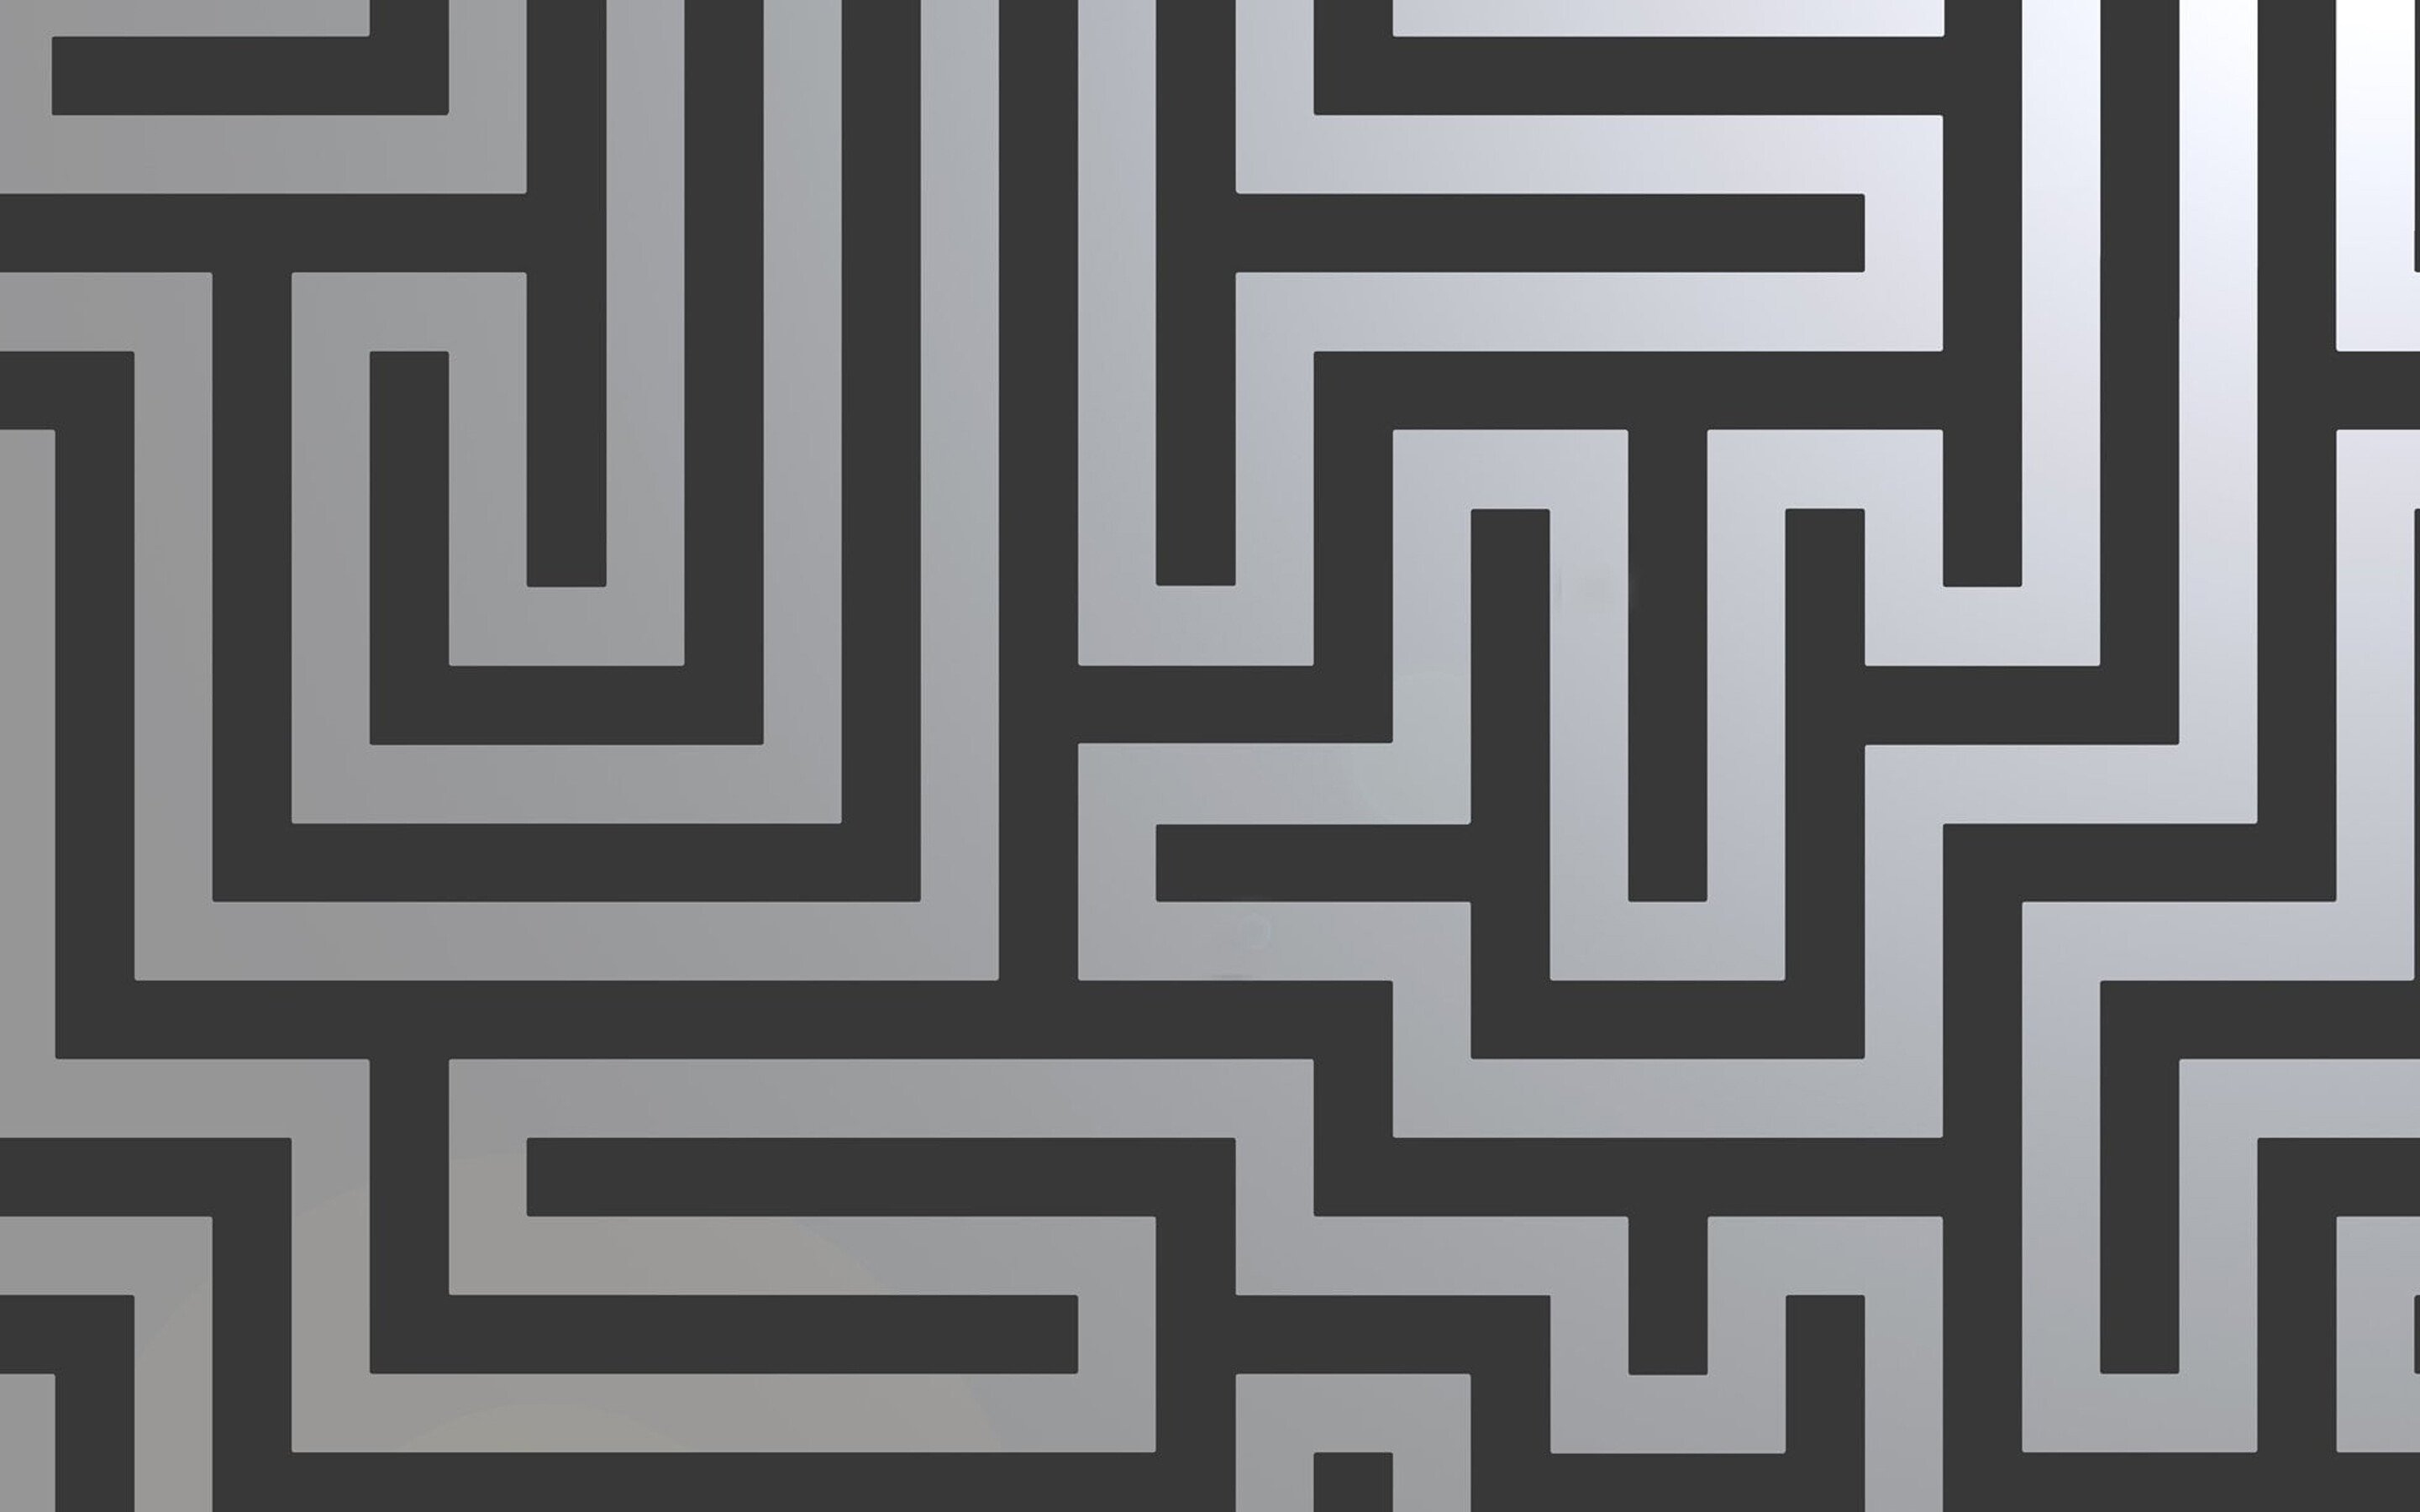 Labyrinth: Has dead ends and traps which add to the challenge of navigating it. 2880x1800 HD Wallpaper.